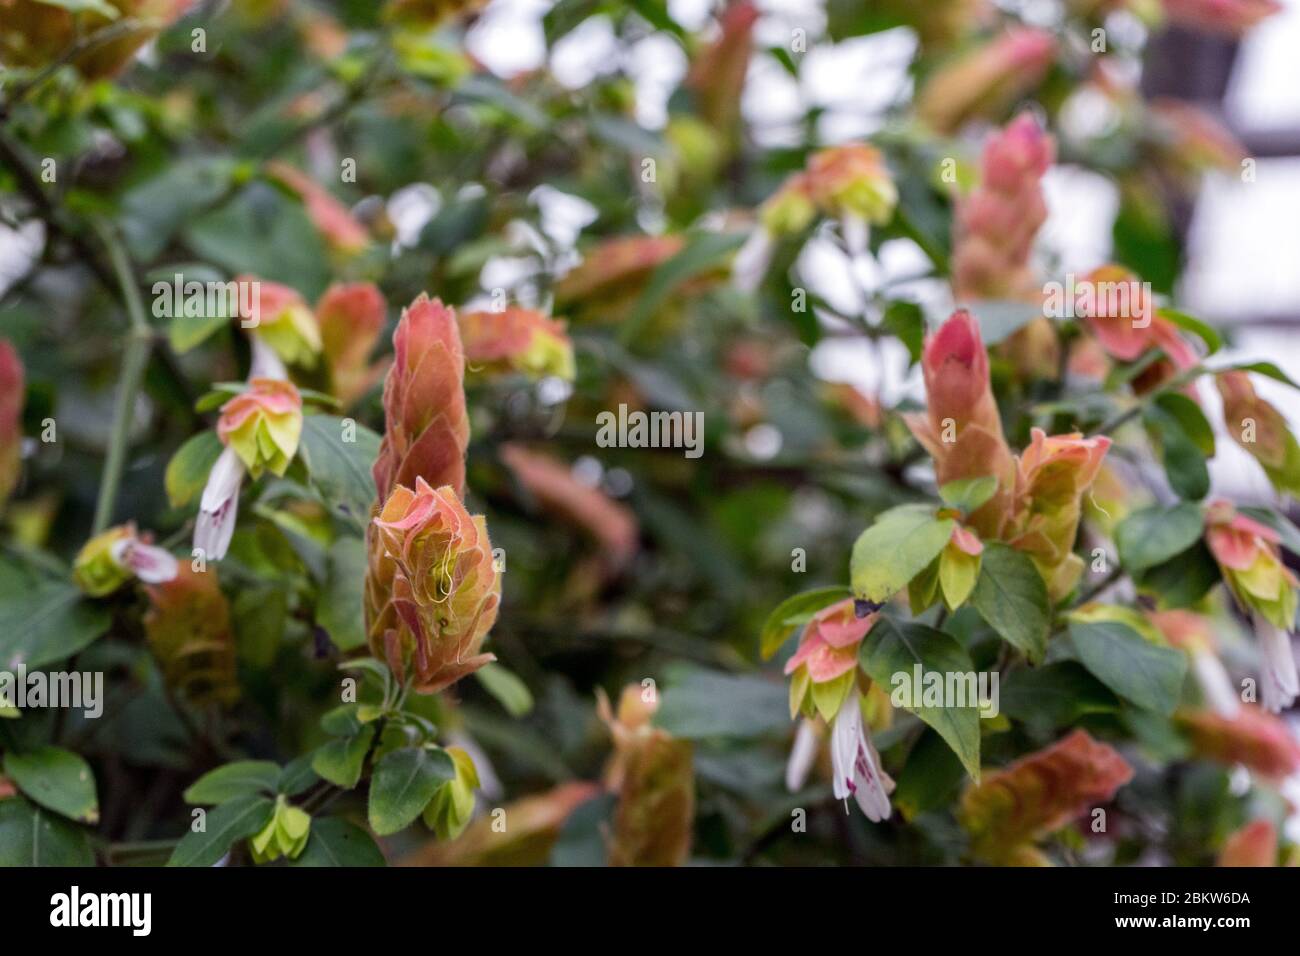 flowers of Justicia brandegeeana in blooming. evergreen shrub Mexican shrimp plant, shrimp plant or false hop. soft focus. Stock Photo